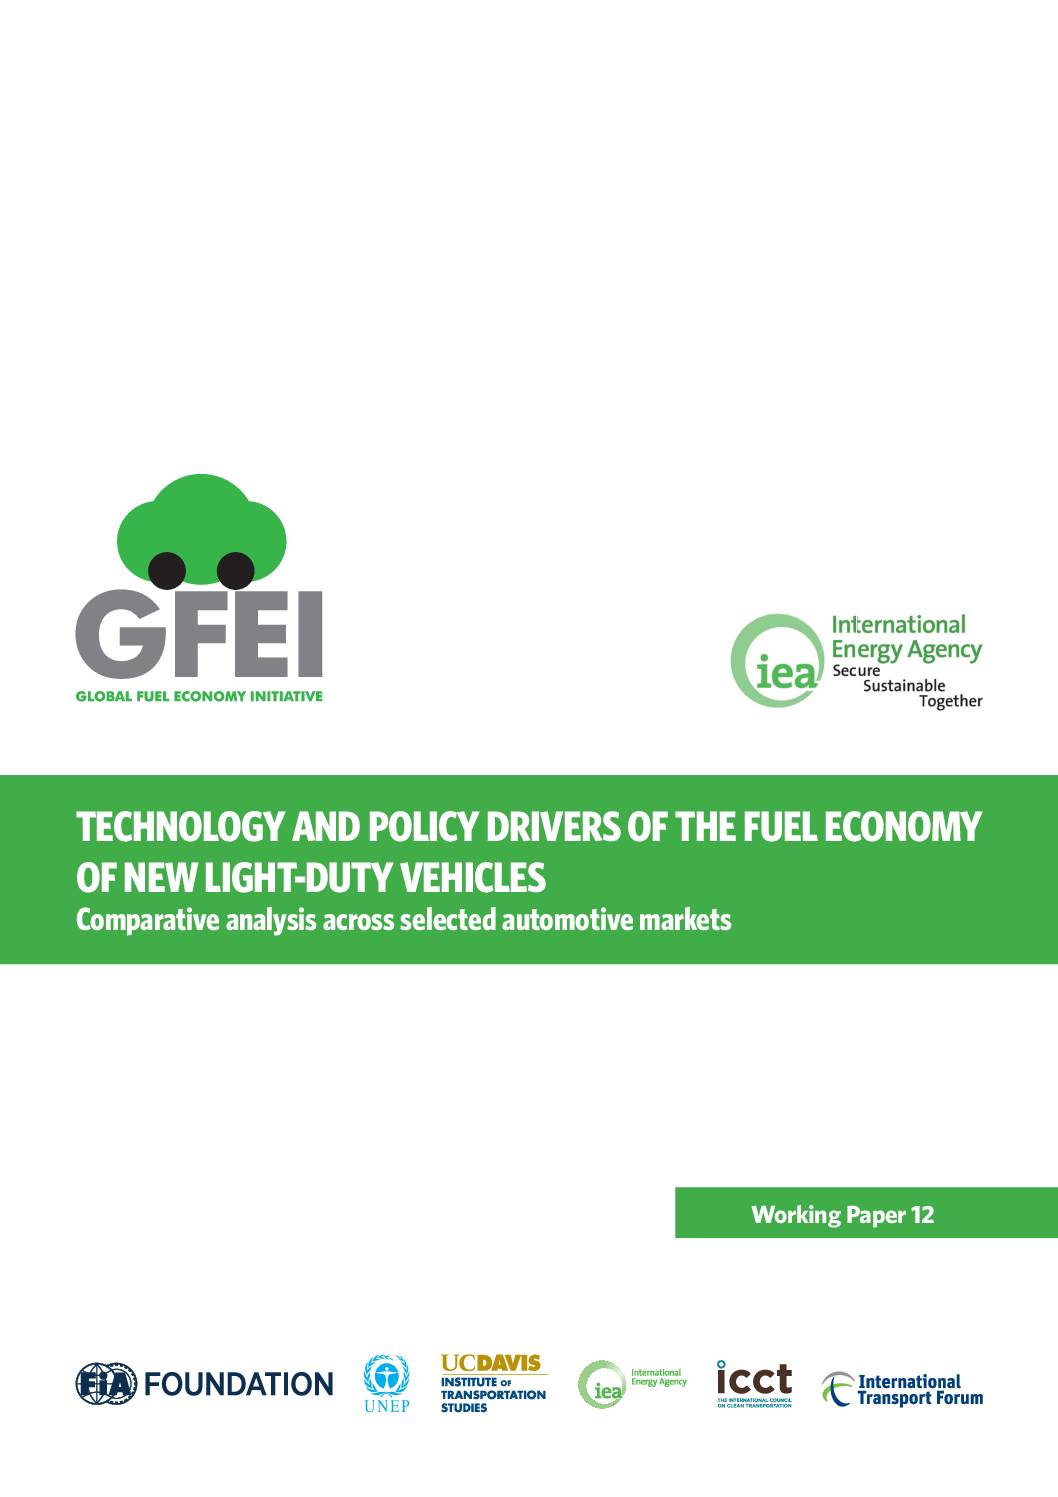 Technology and policy drivers of the fuel economy of new light-duty vehicles: Comparative analysis across selected automotive markets